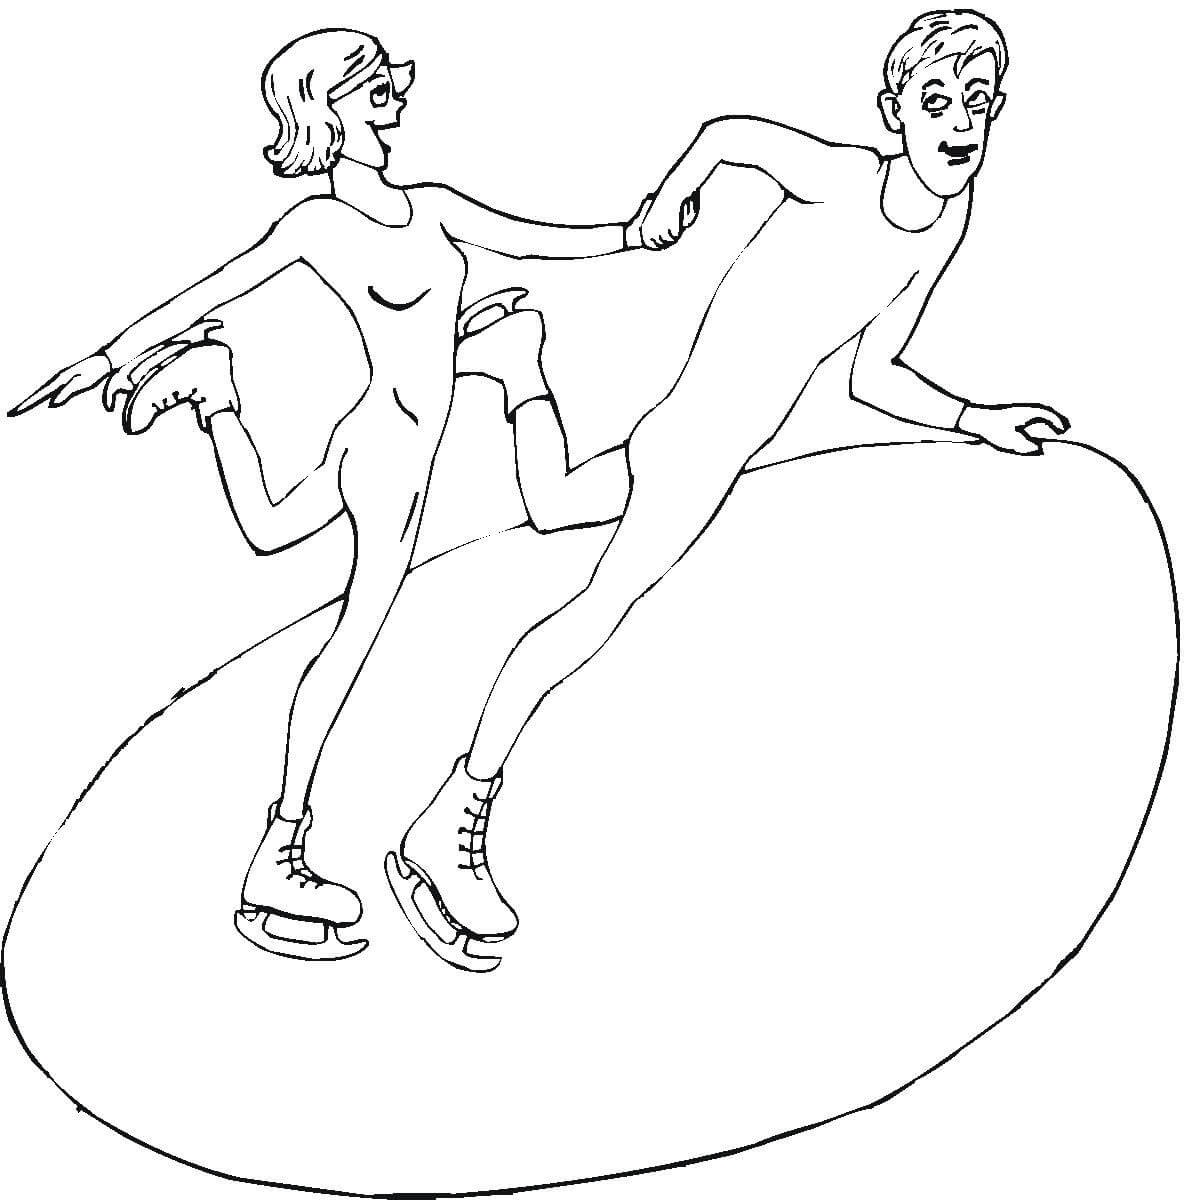 Couple Of Ice Skaters Coloring Page